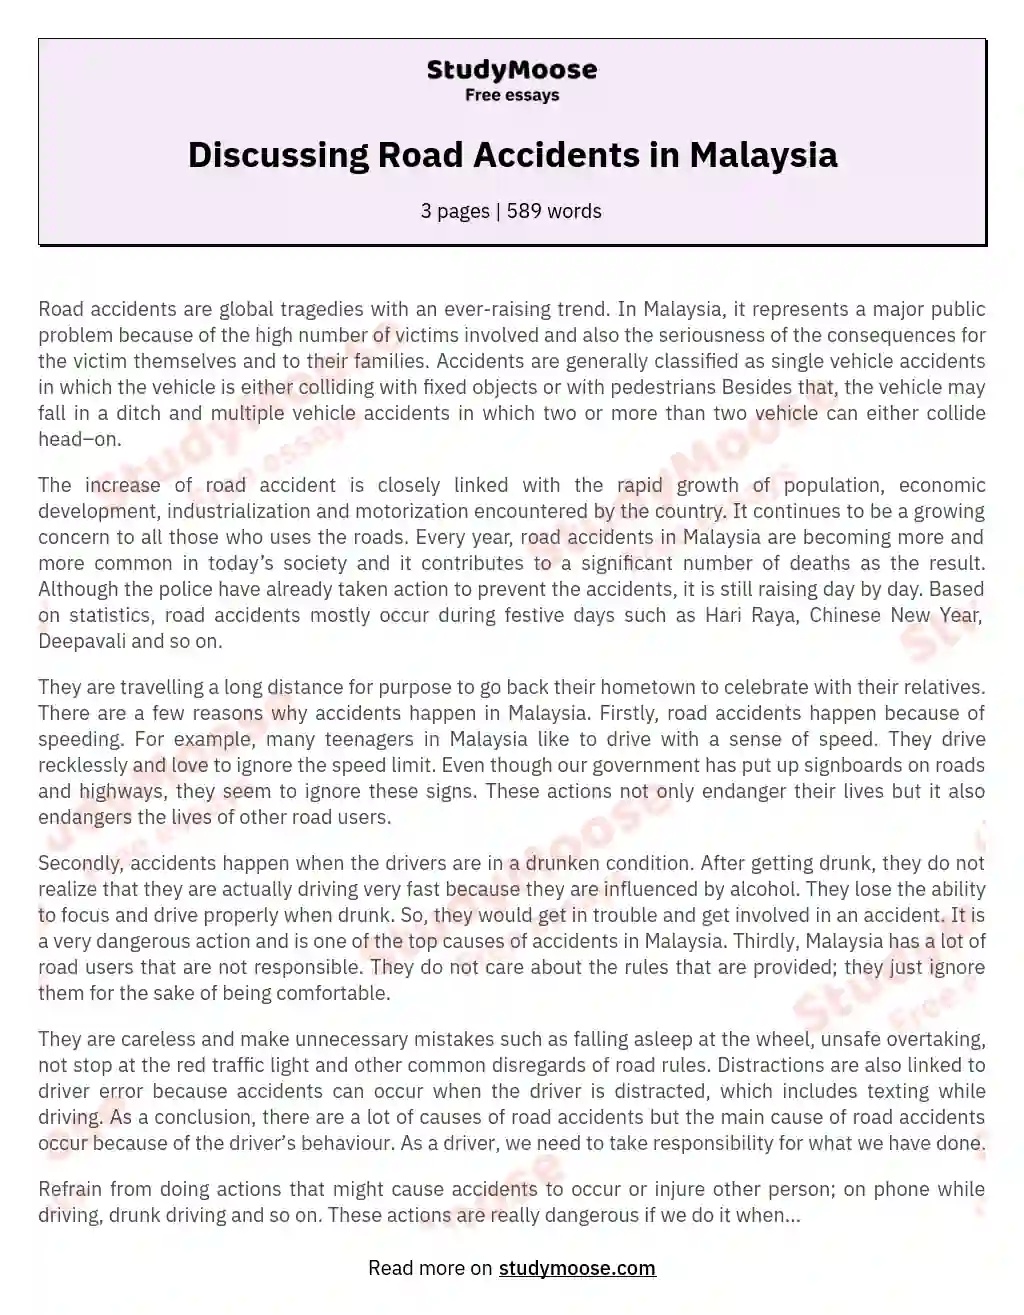 Discussing Road Accidents in Malaysia essay